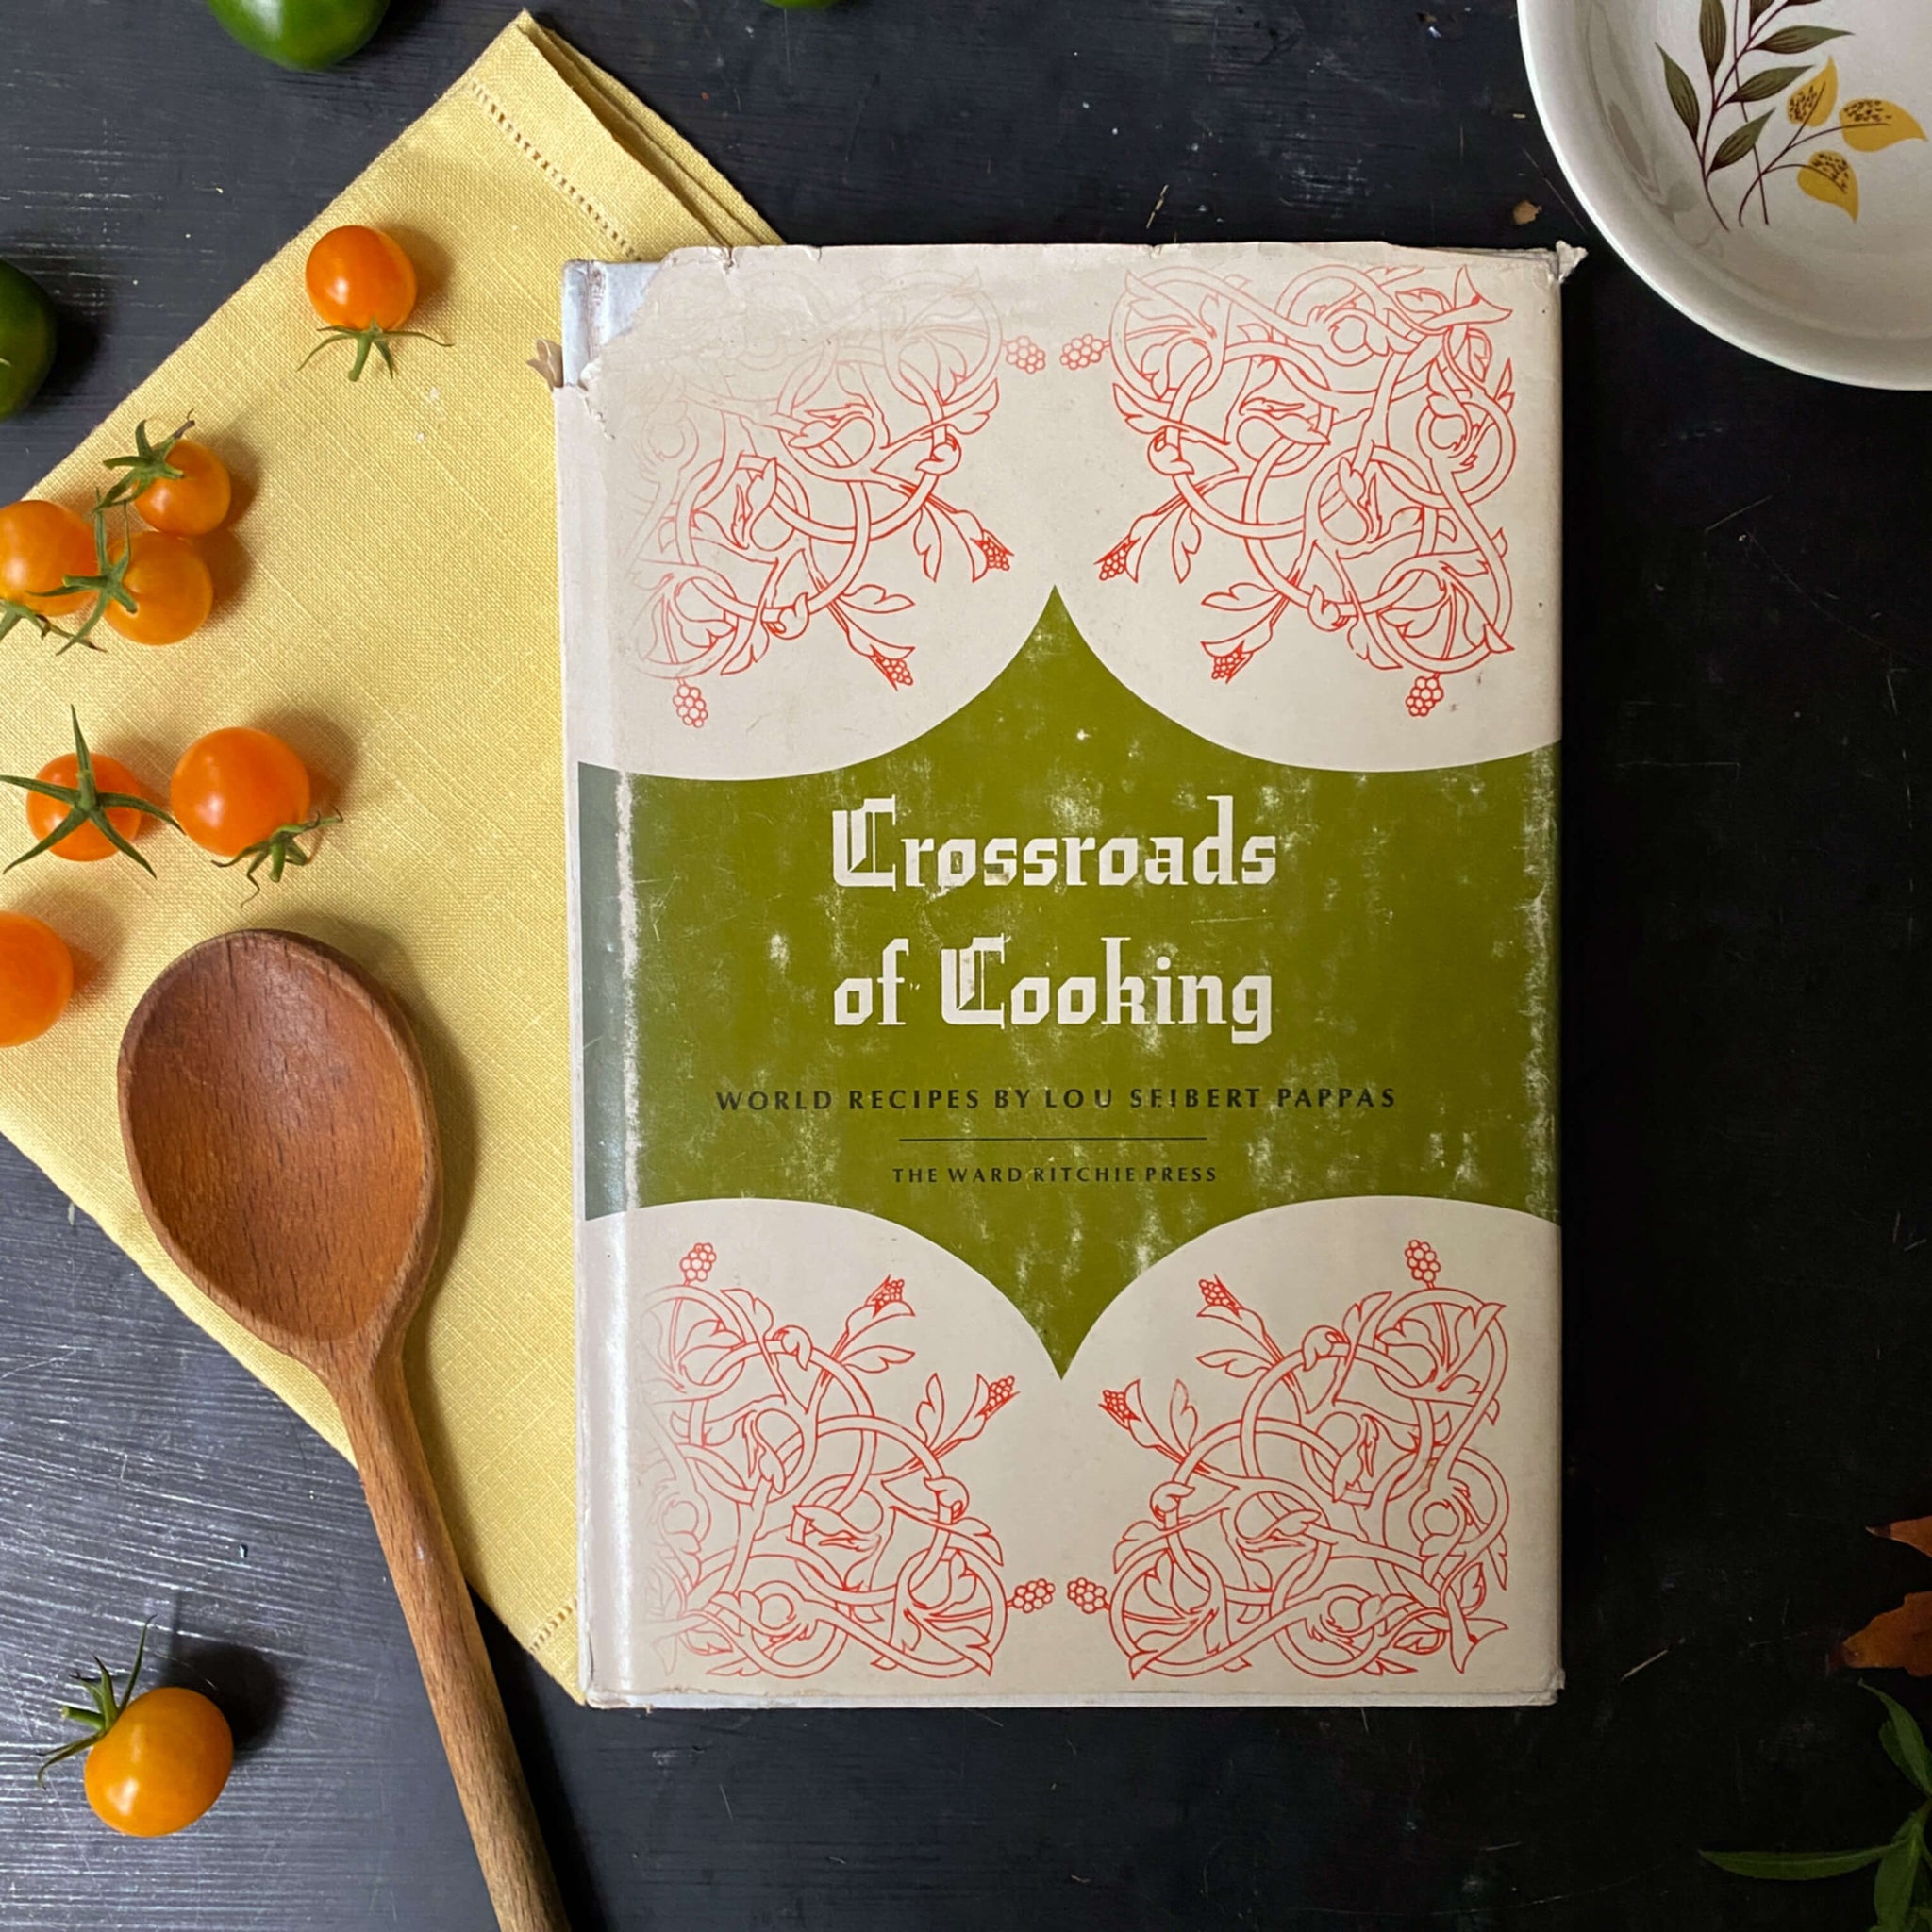 Crossroads of Cooking by Lou Seibert Pappas - 1973 Edition - International Recipes